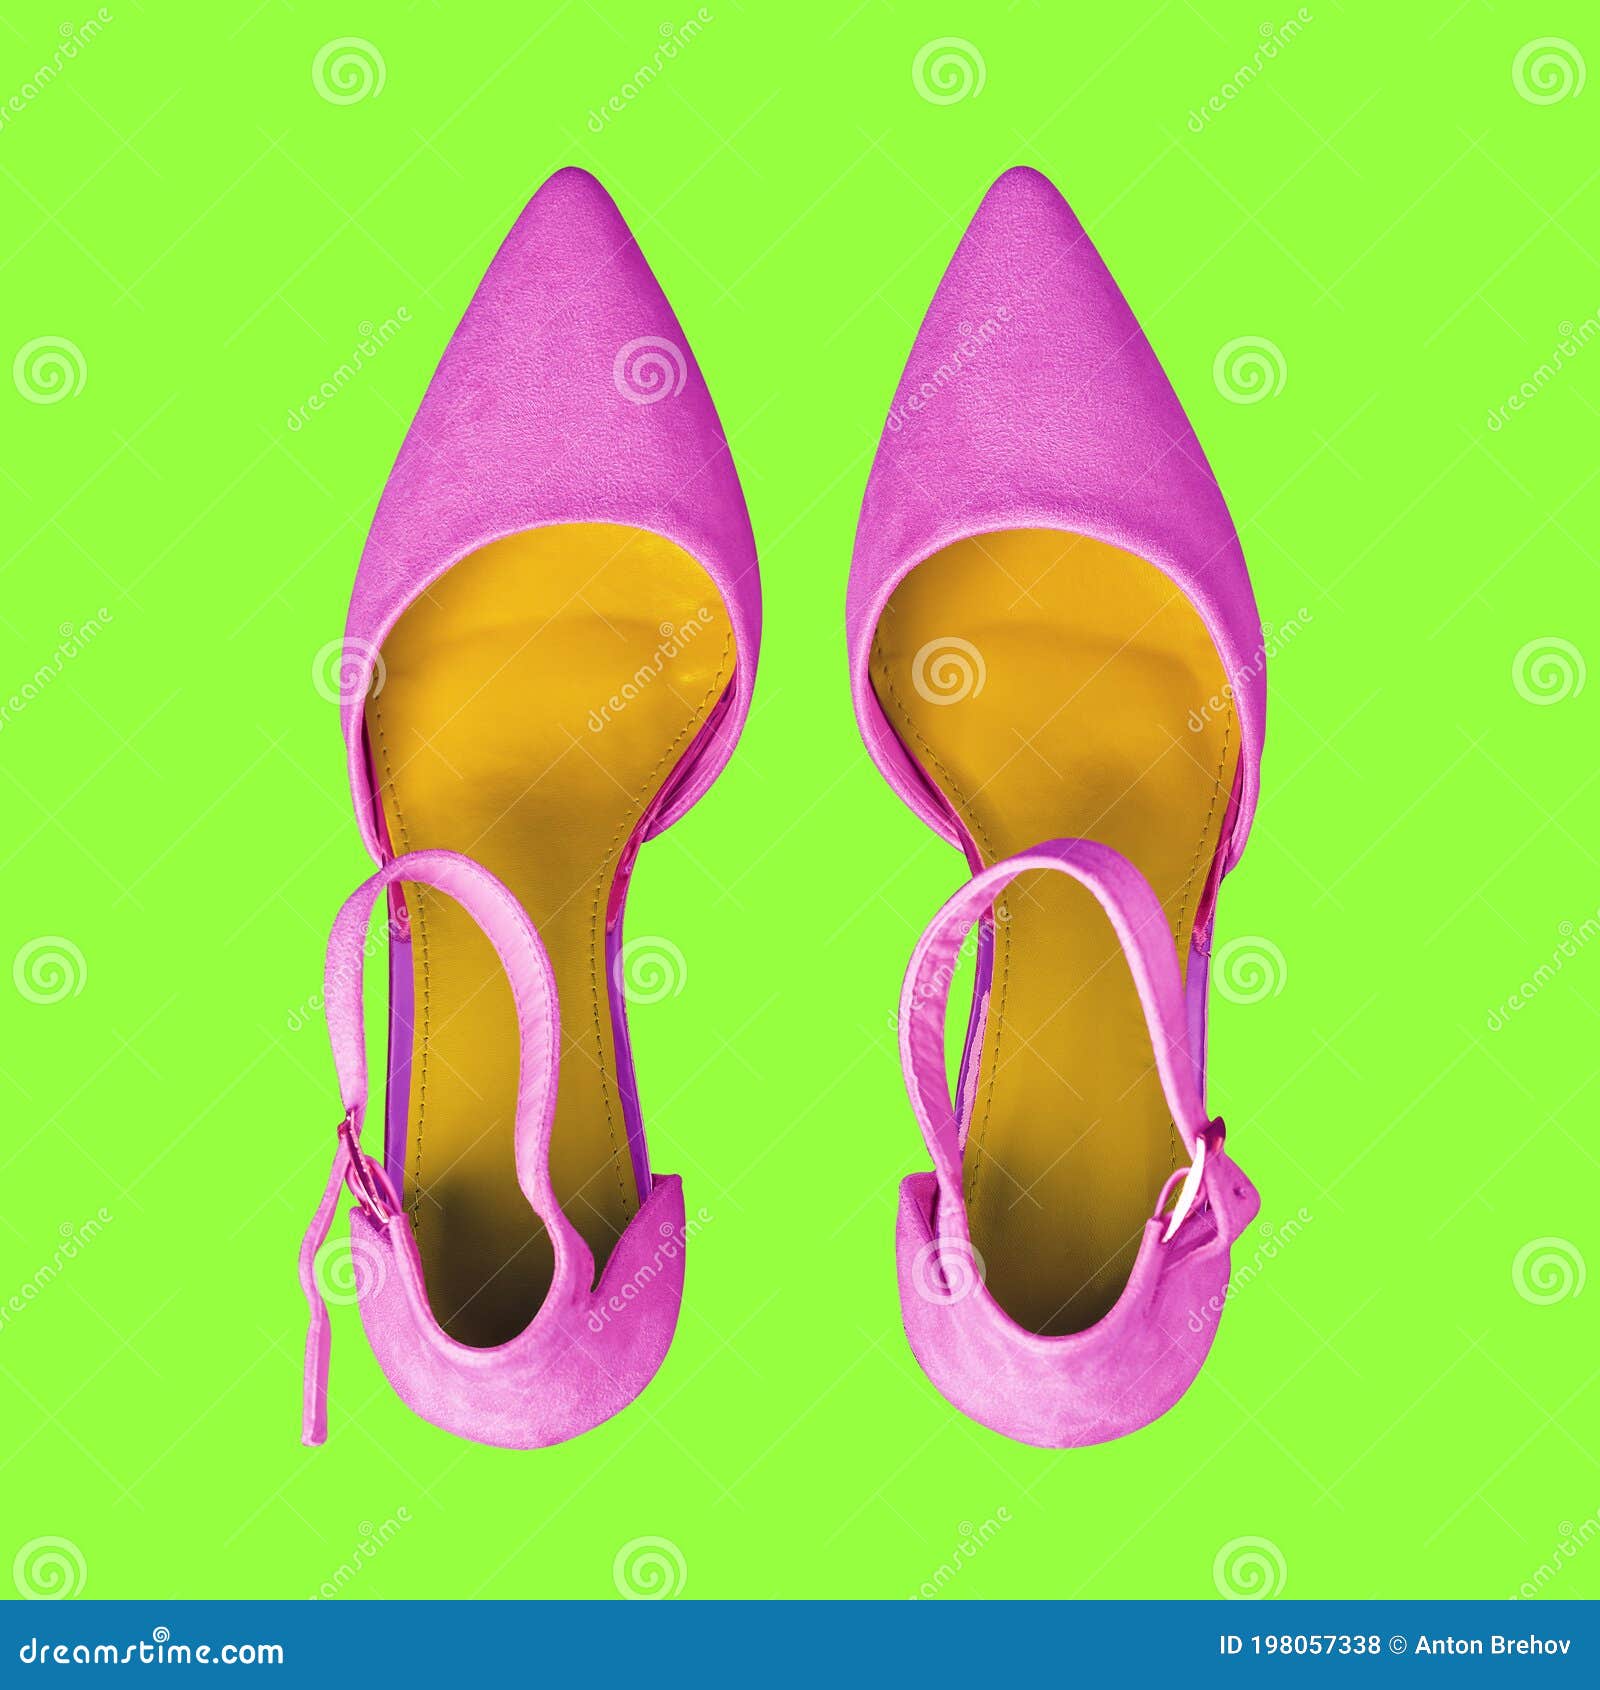 Purple Shoes on a Light Green Background. Fashionable Womens Shoes ...